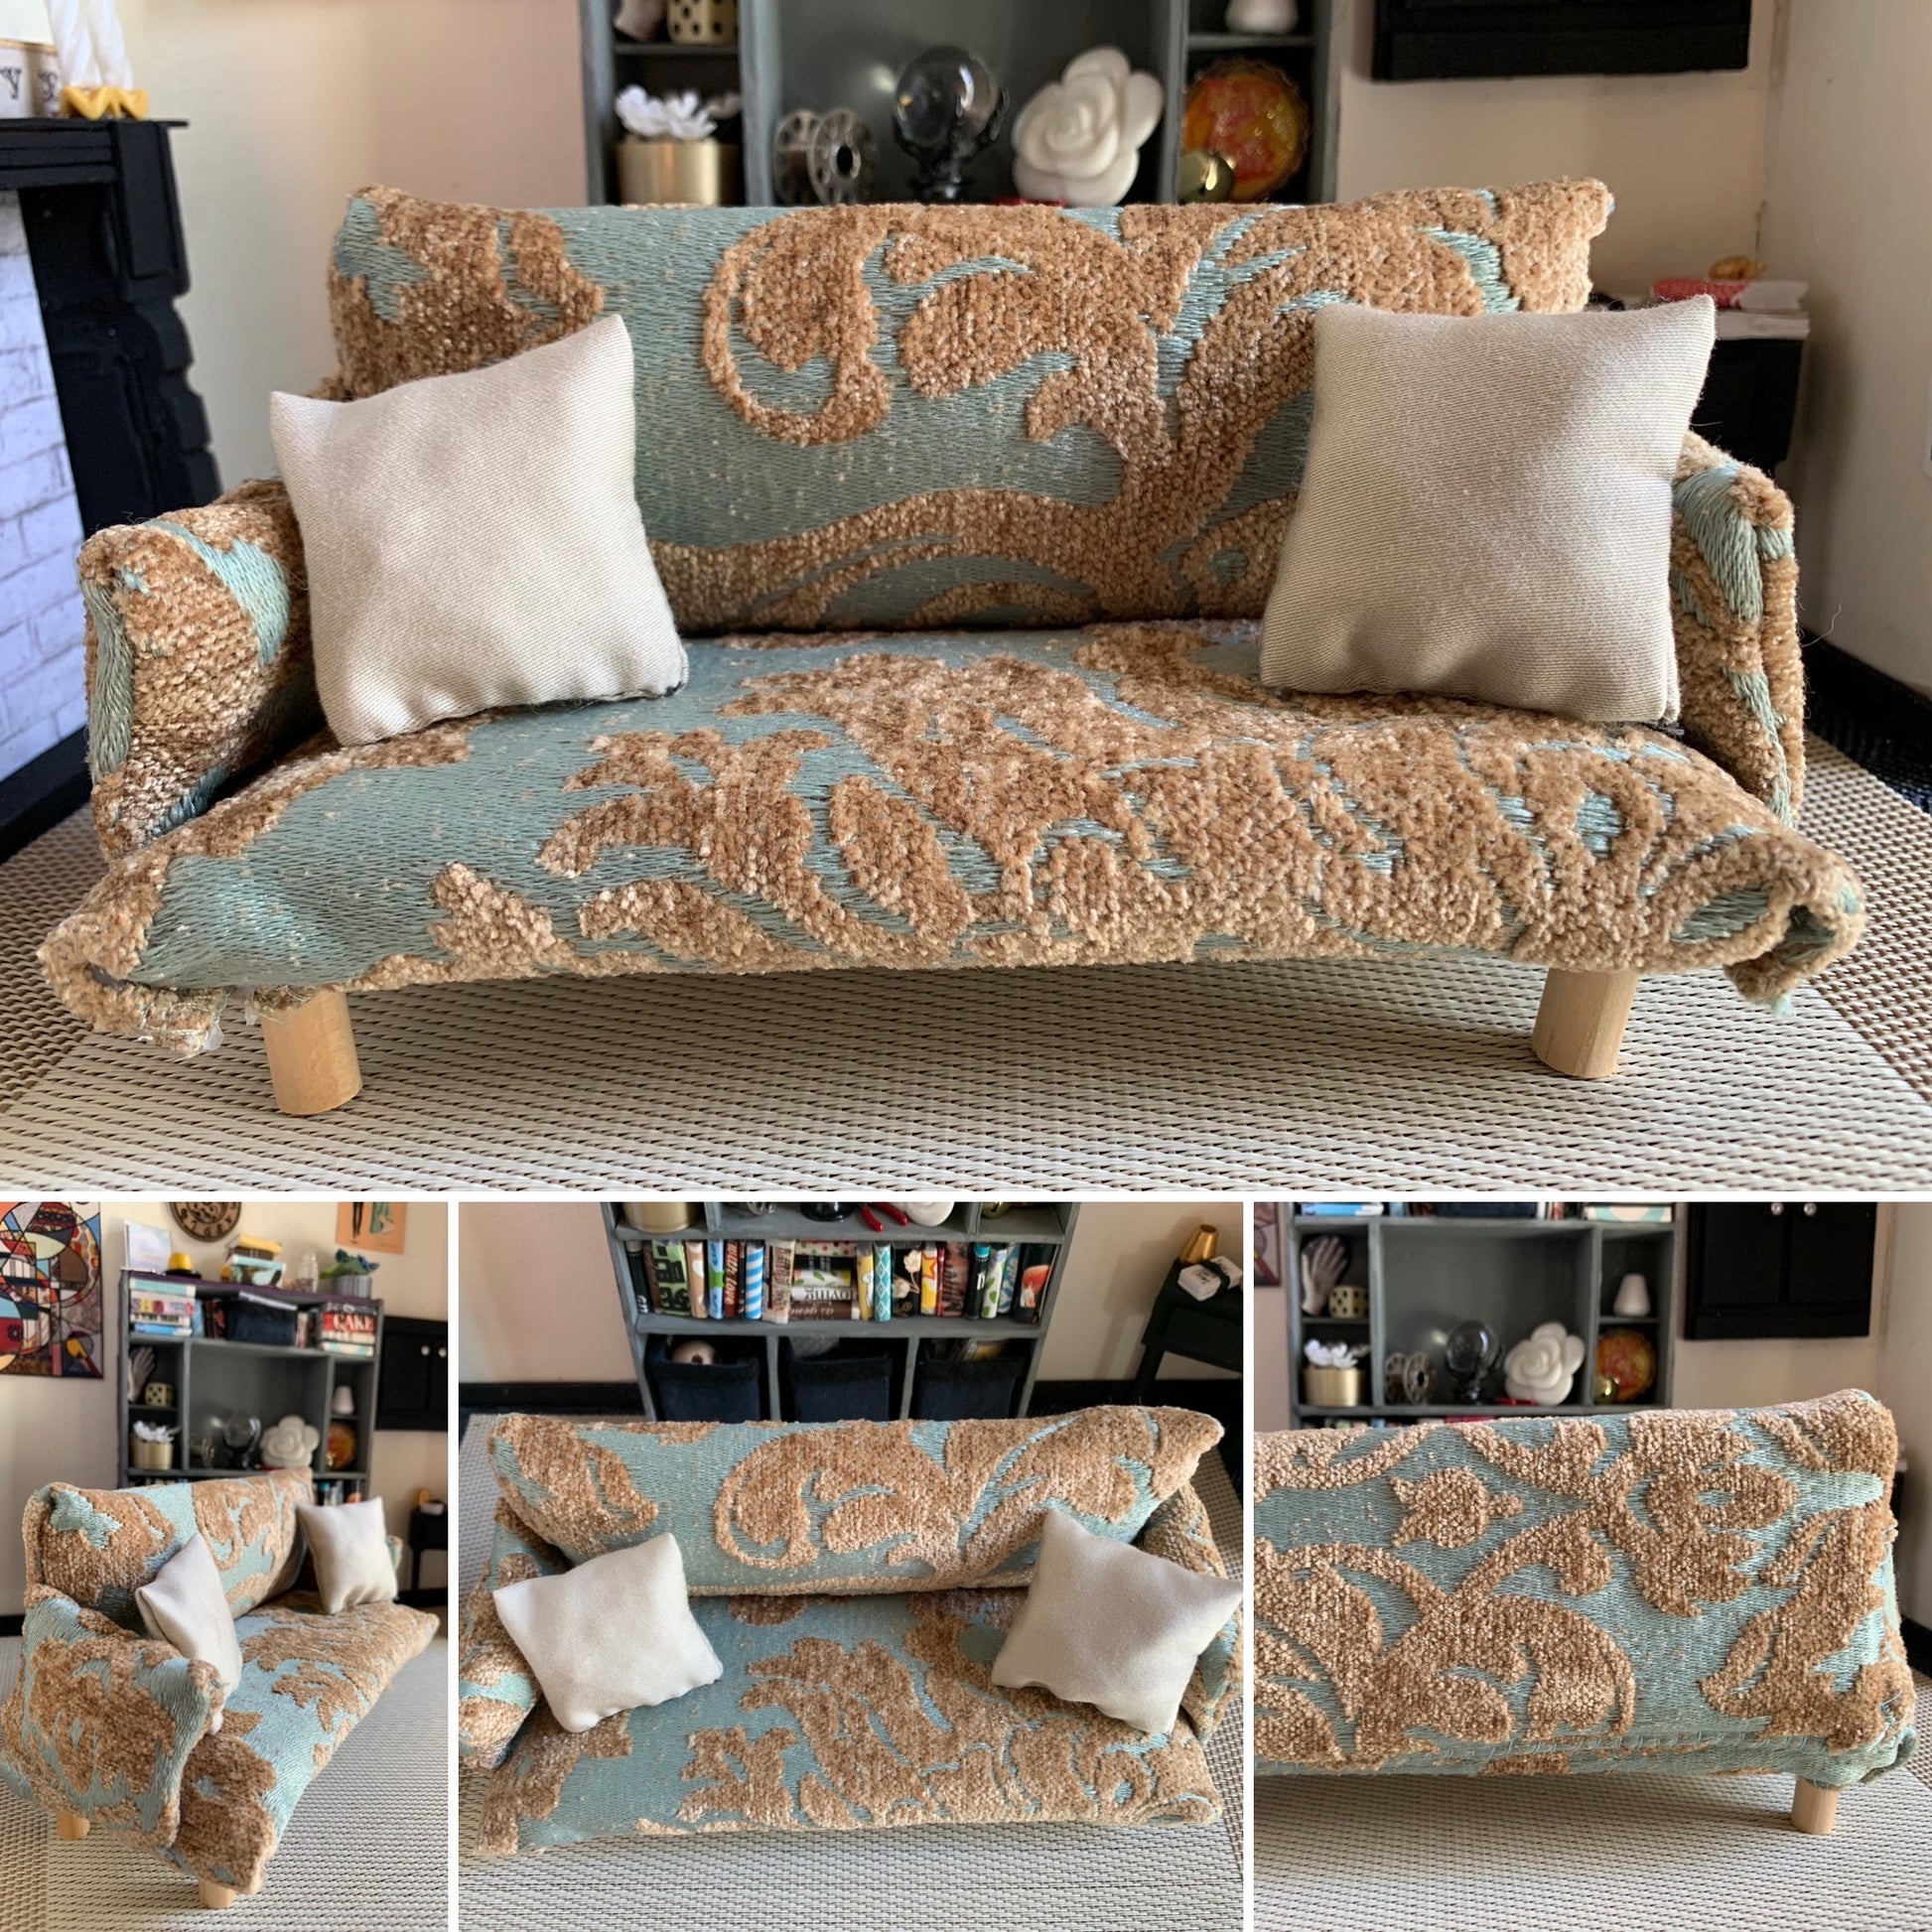 a miniature dollhouse couch, top picture is front view, bottom three photos show side, back, and aerial view details